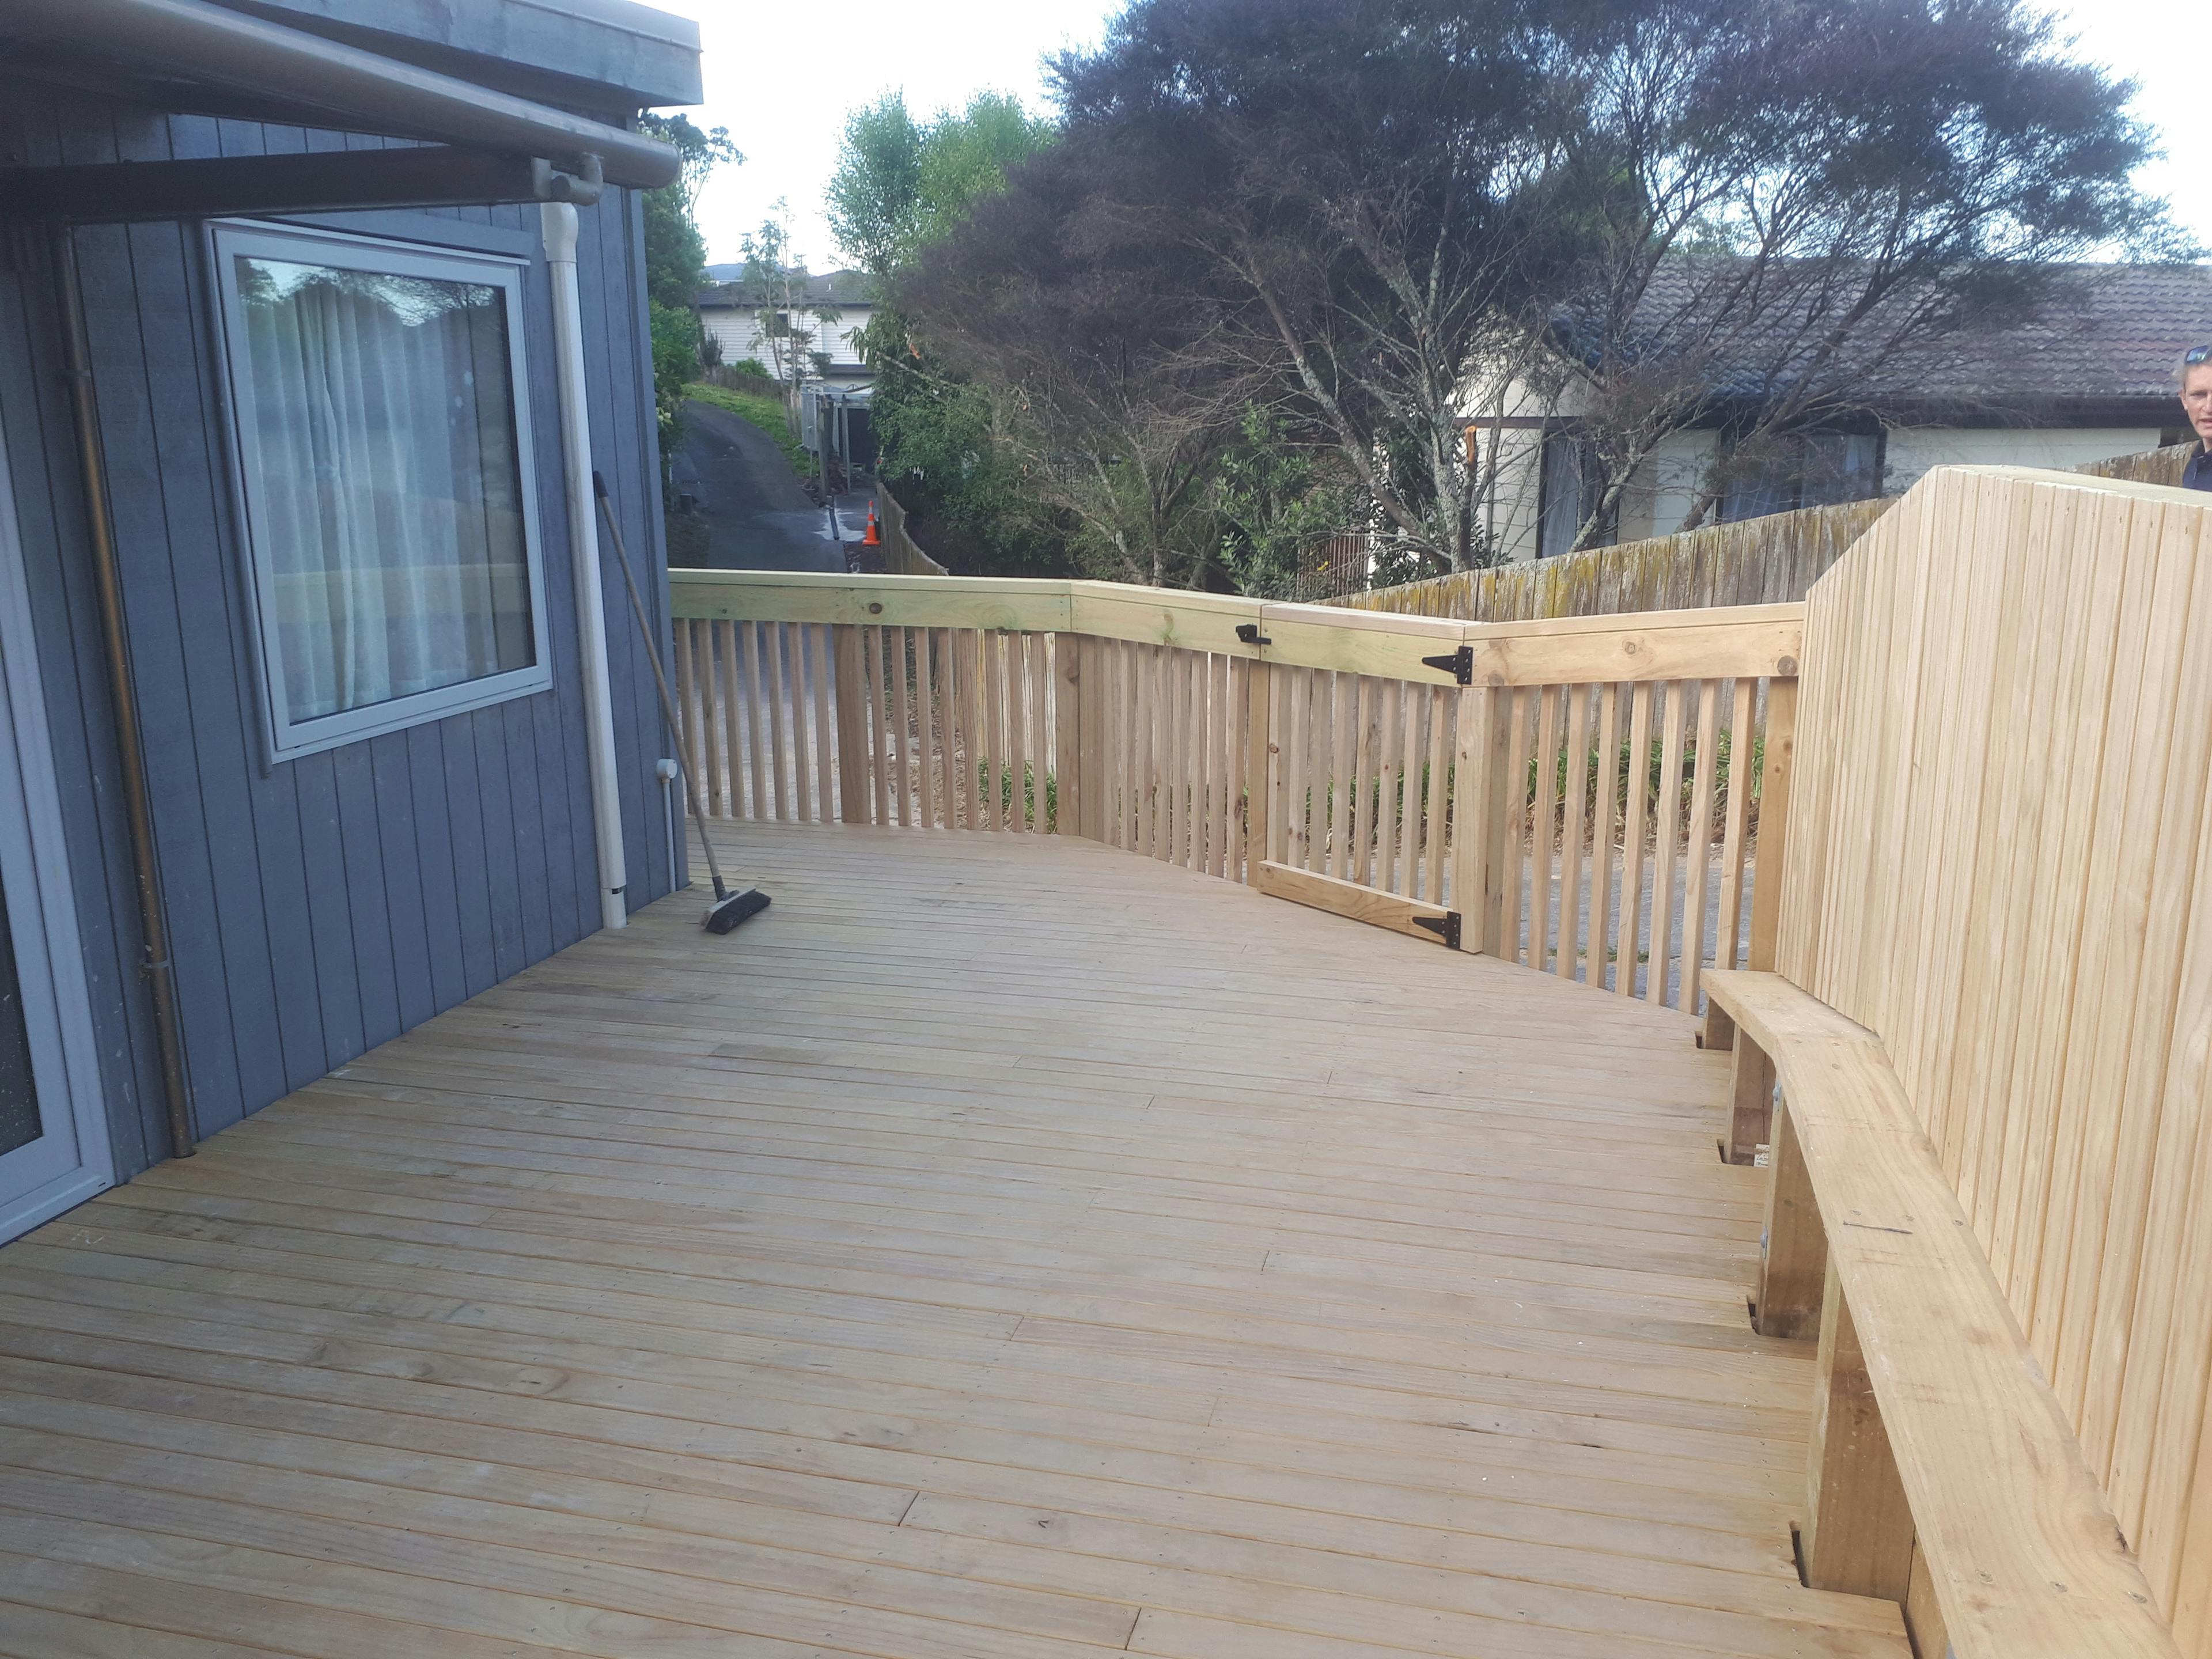 Looking for a new deck for your family? Has the recent weather dropped a tree on your new deck? Check out what we can do for you!